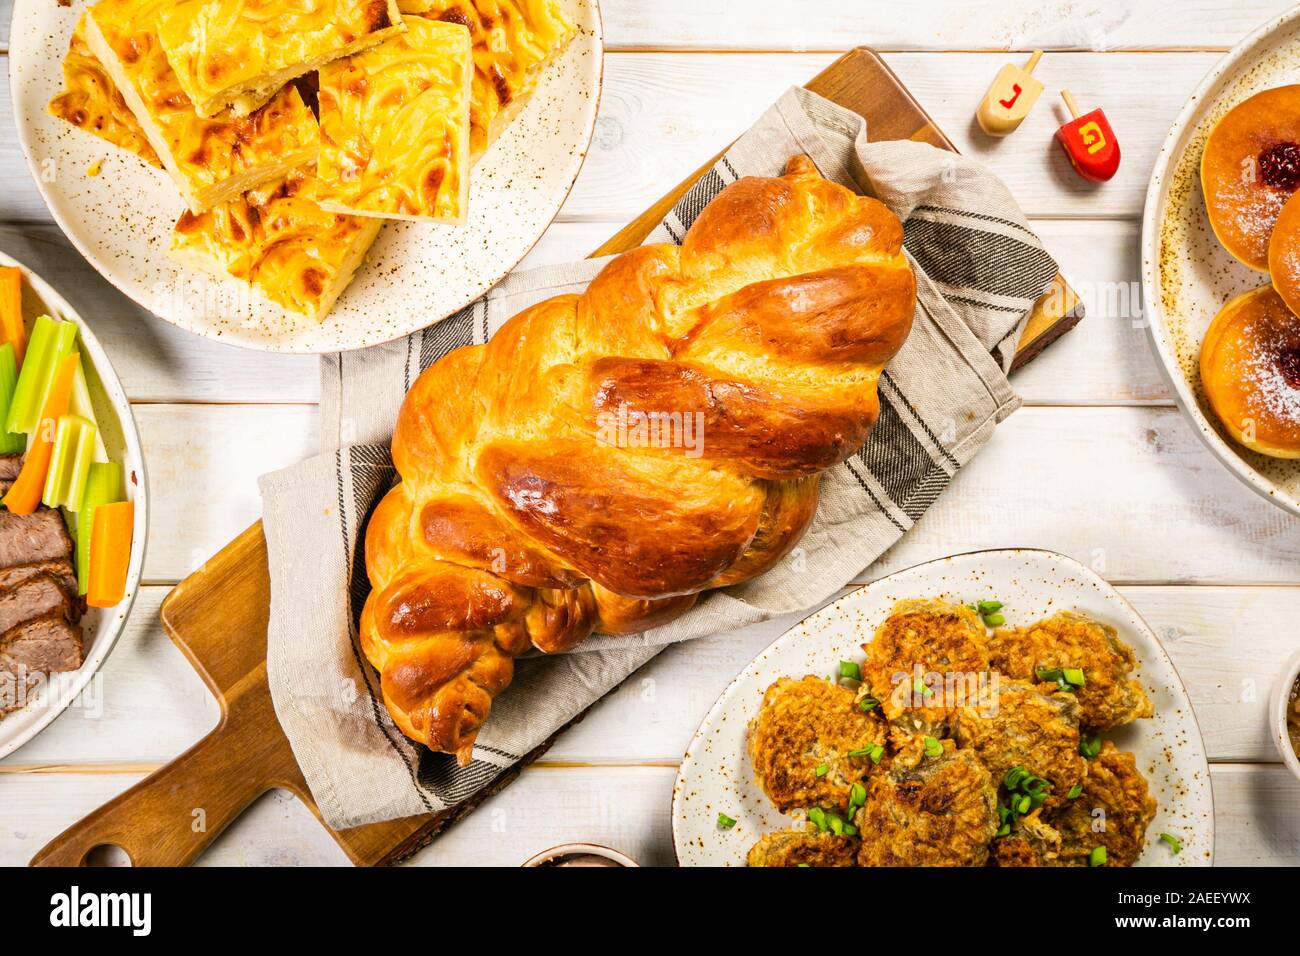 Selection of traditional hanukkah food for festive dinner, wood background Stock Photo